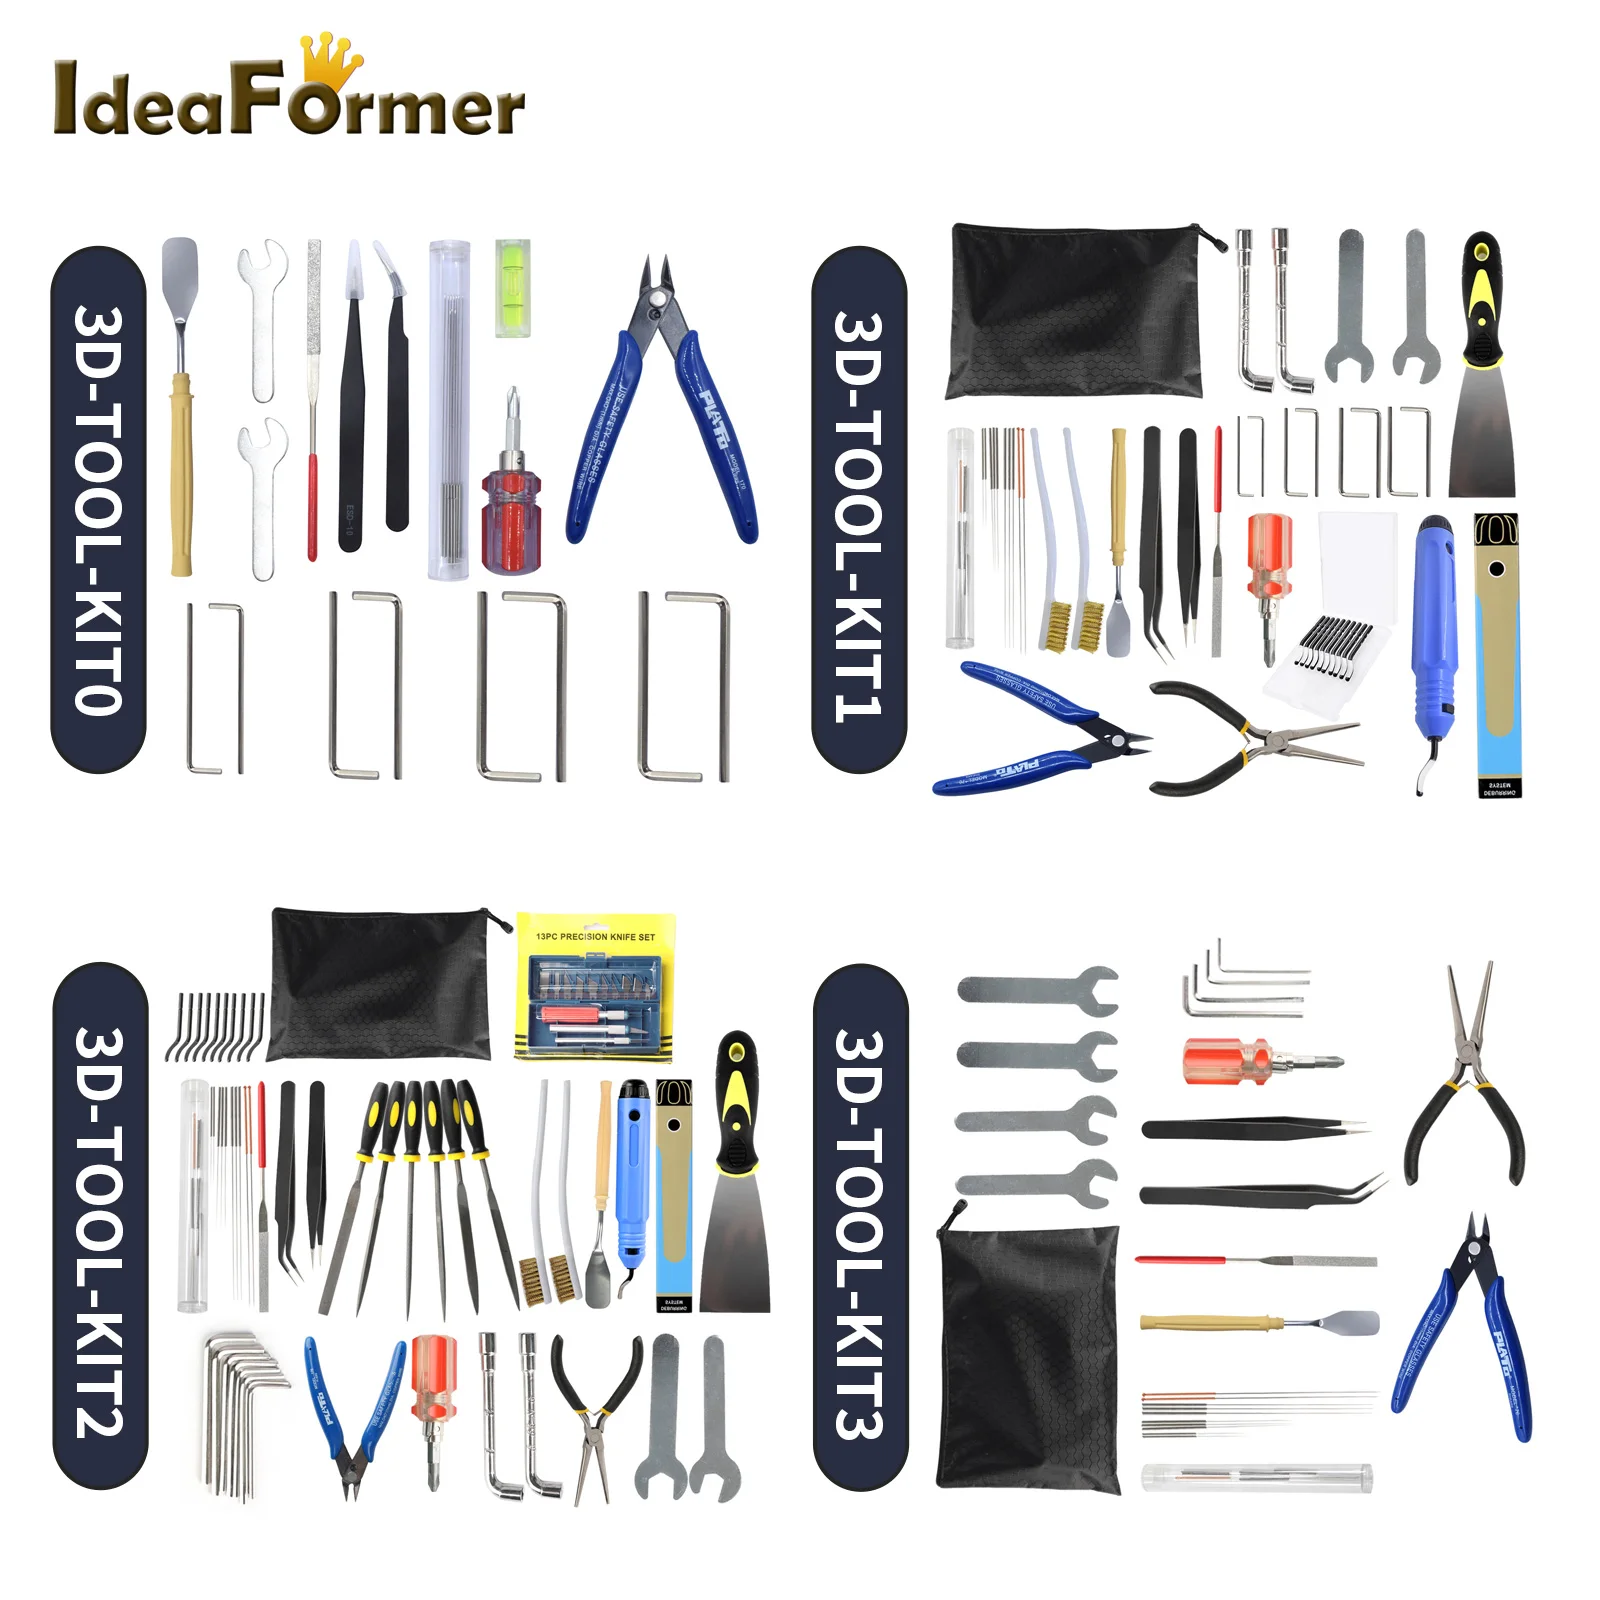 IdeaFormer-3D Printer Tool Kit for 3D Printing Maintenance, Cleaning, Removing, Trimming, Finishing 3D Printer Accessories